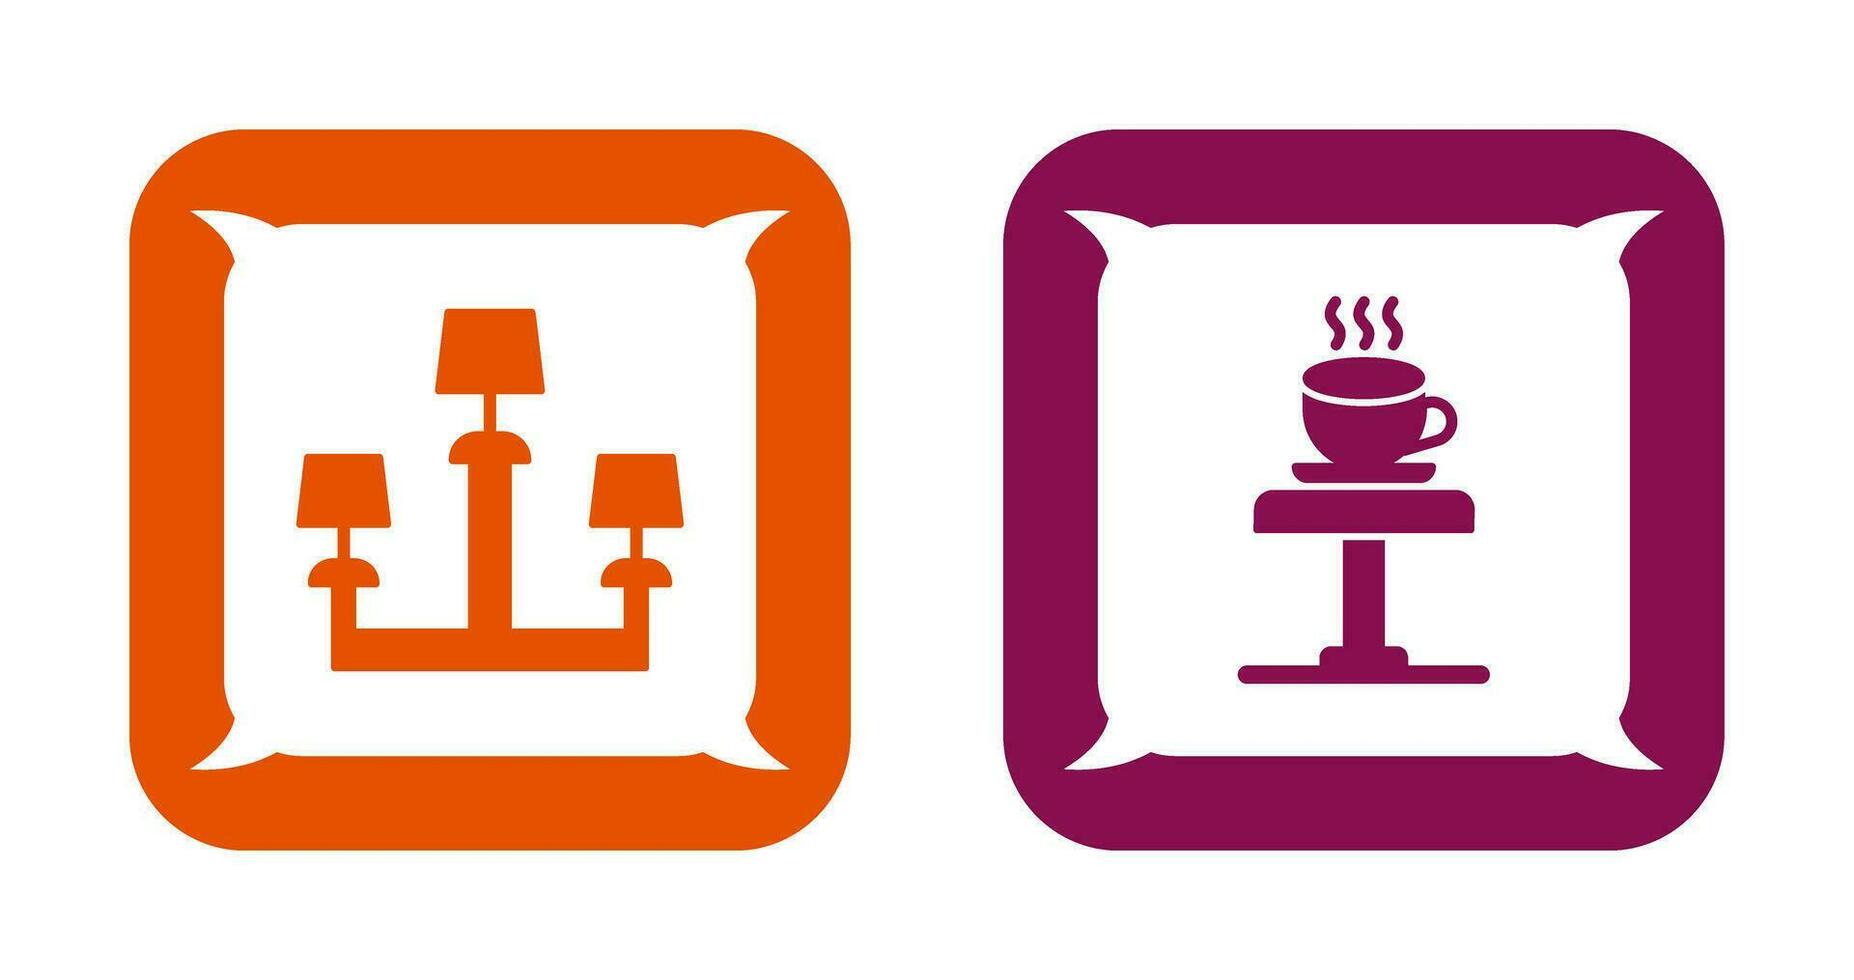 Lamp and Coffee Table Icon vector